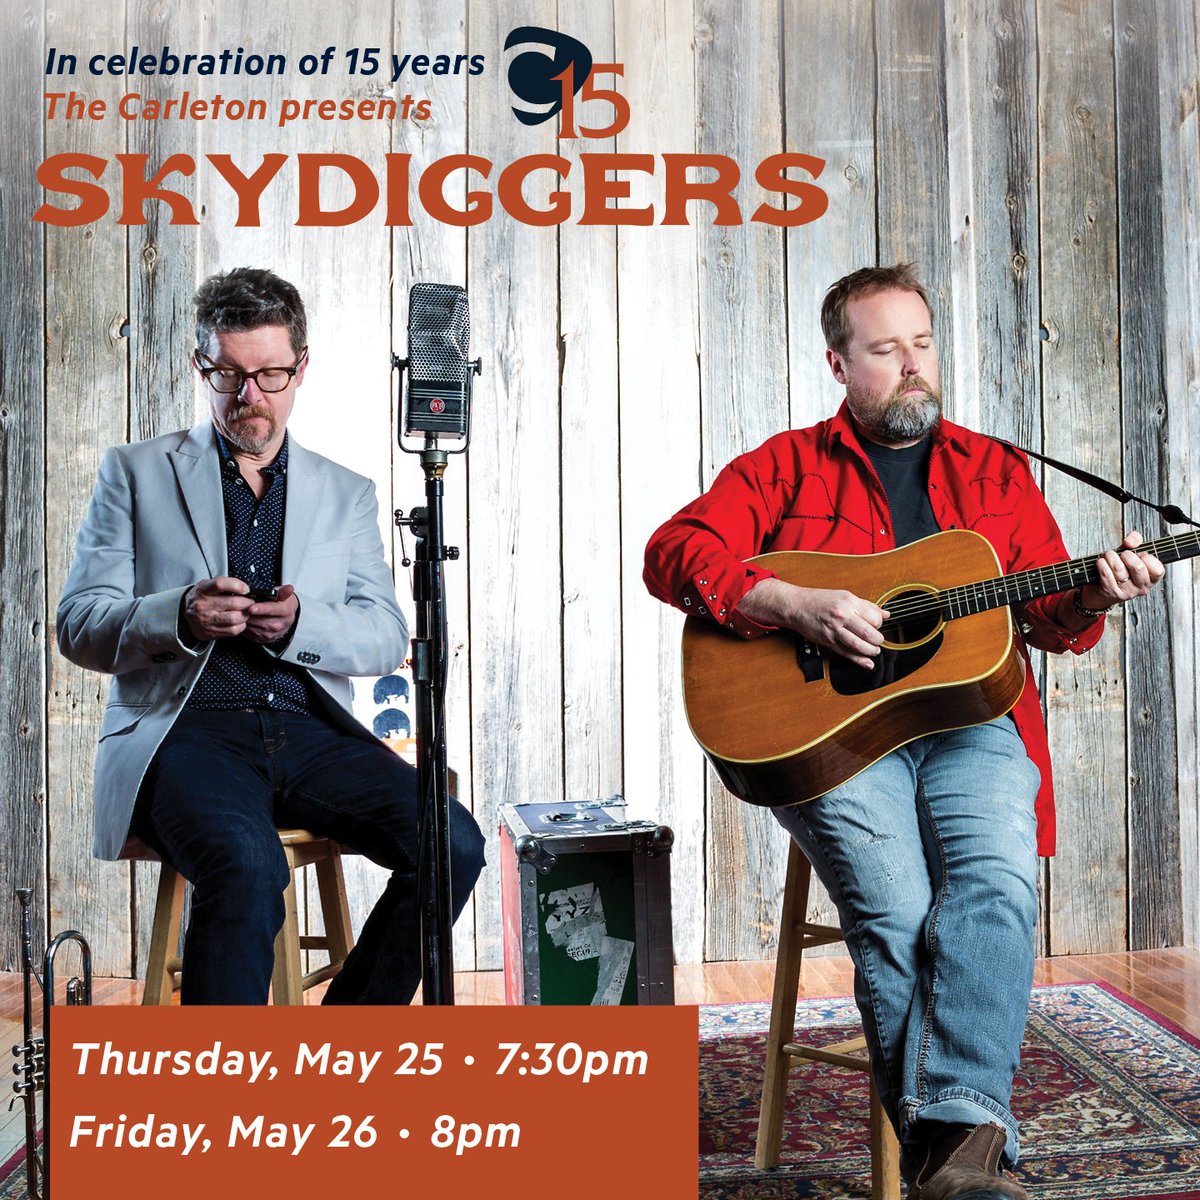 Just Announced! As part of the @CarletonHalifax's 15th Anniversary celebrations, Canadian roots-rock band @skydiggers will perform 2 shows, May 25 & 26. Tickets on sale now: thecarleton.ca #skydiggers #liveatthecarleton #downtownhalifax